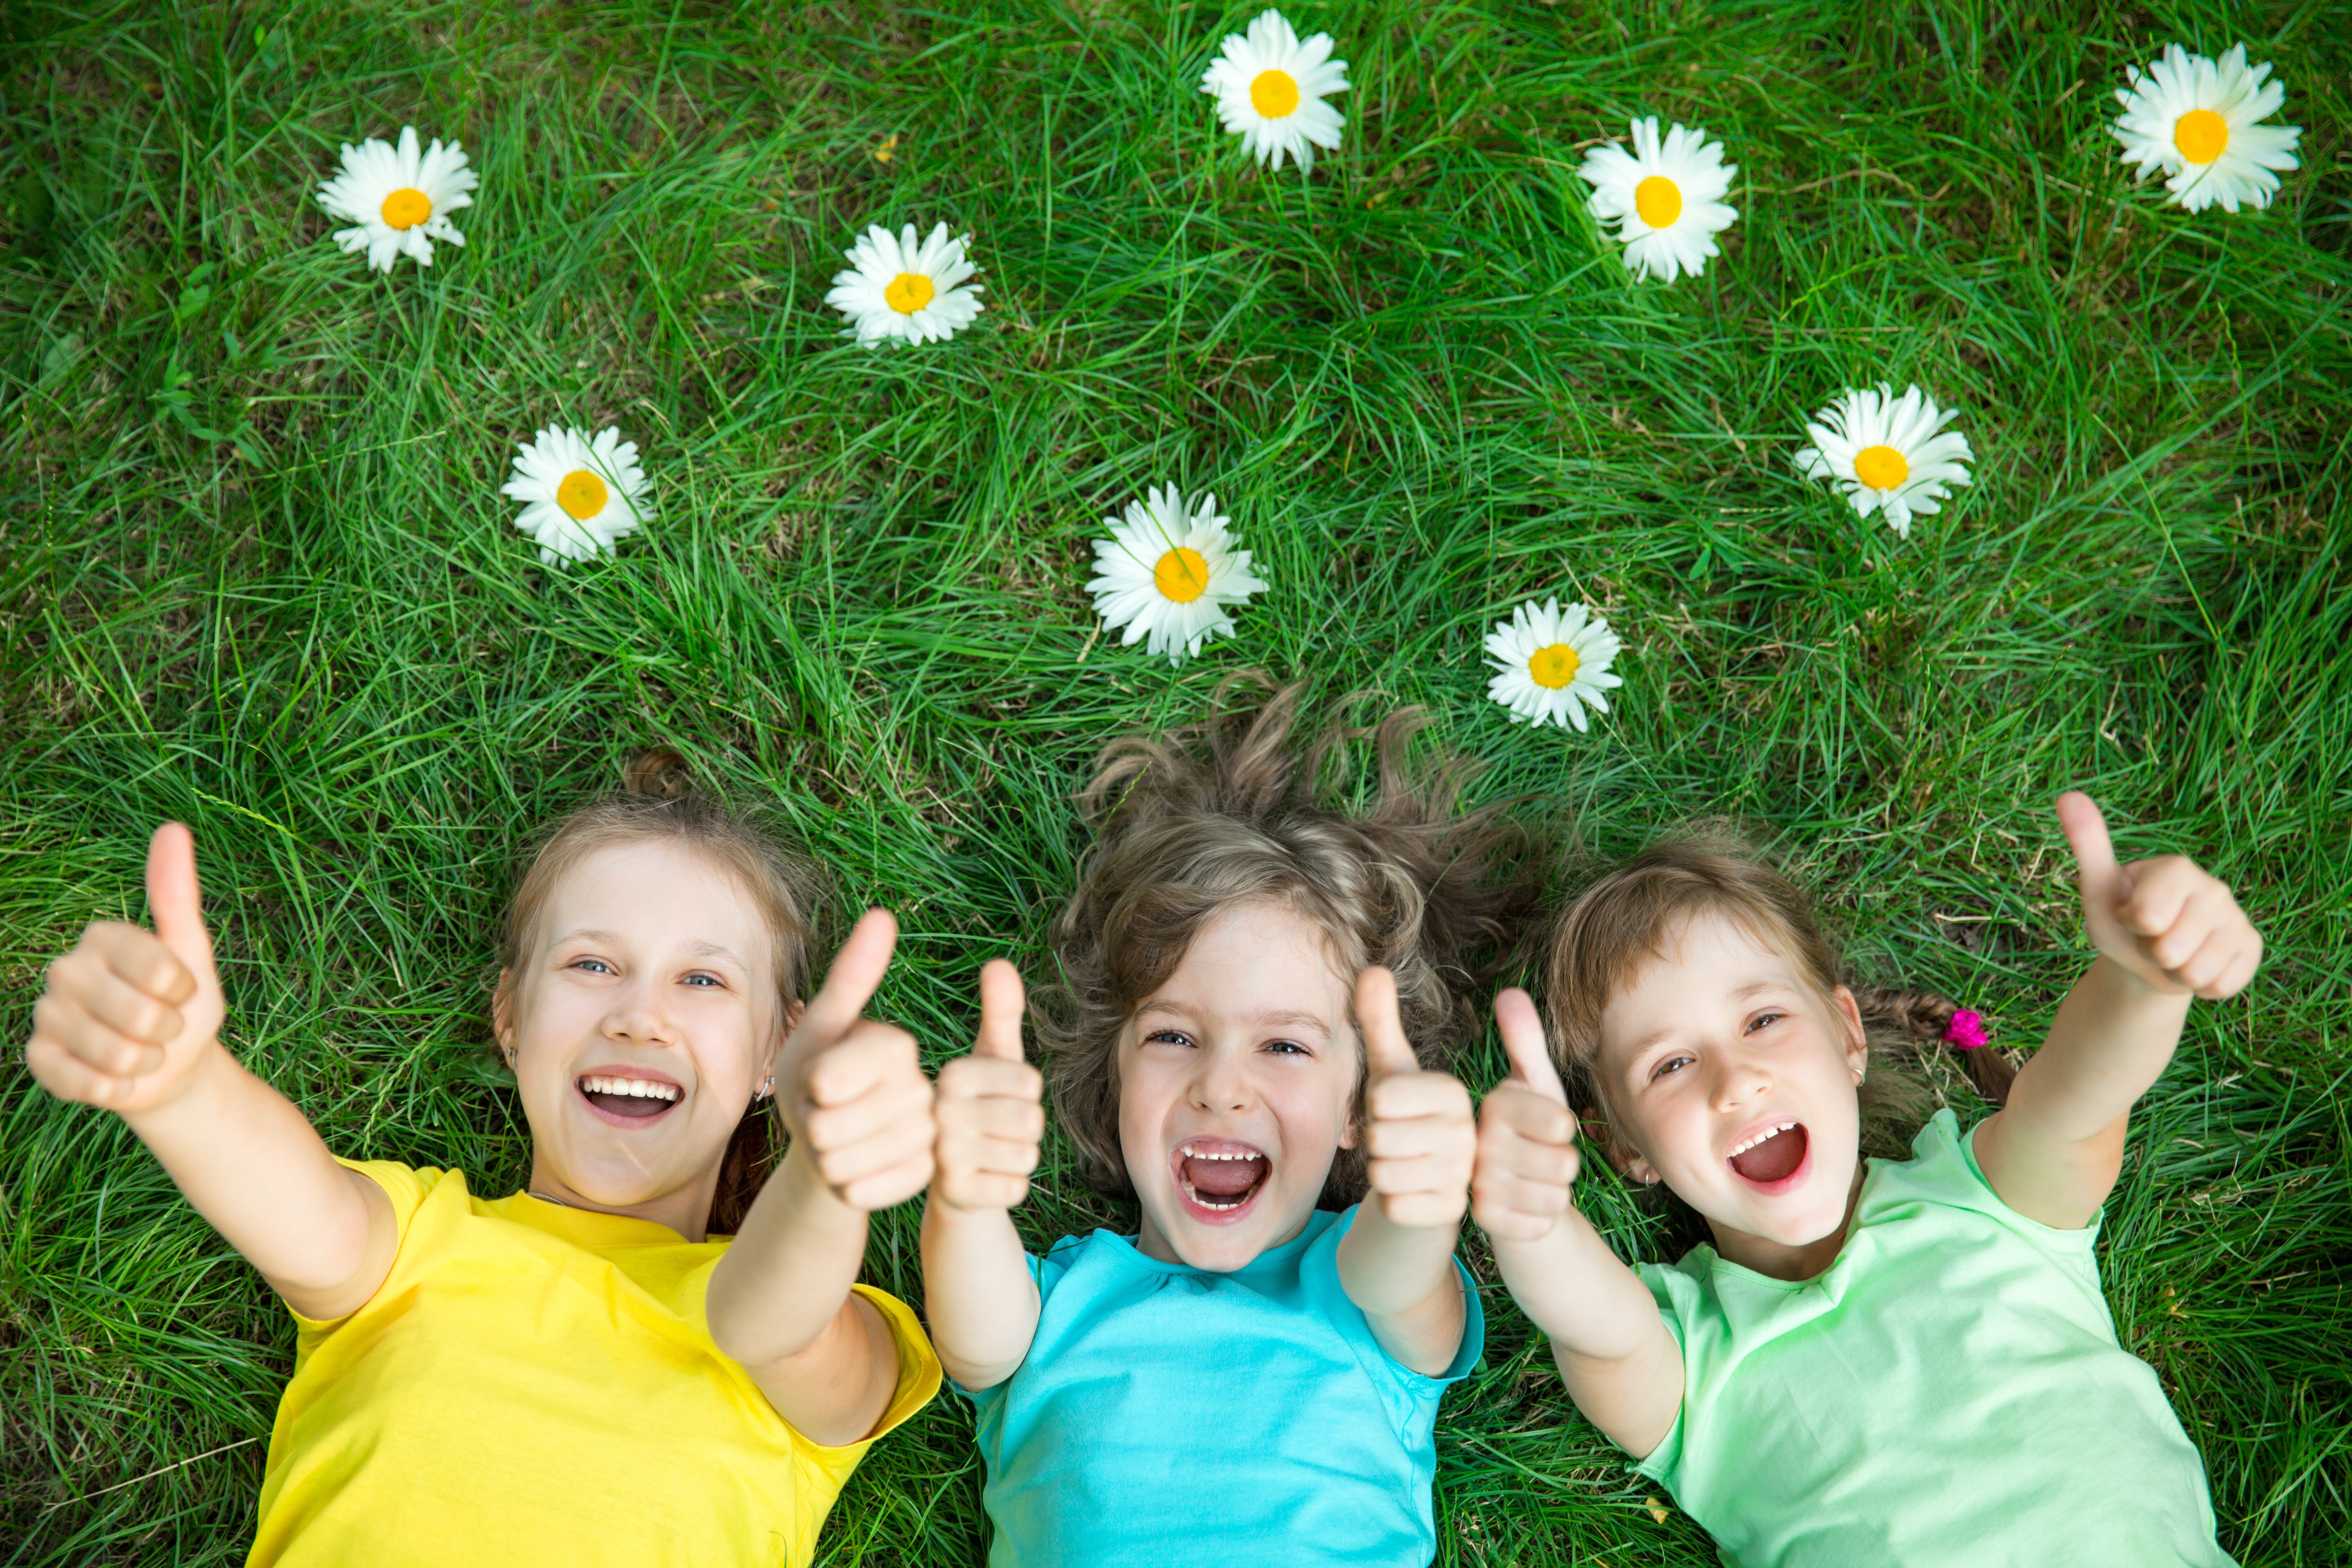 Spring Has Sprung! 18 Fun Spring Facts for Kids